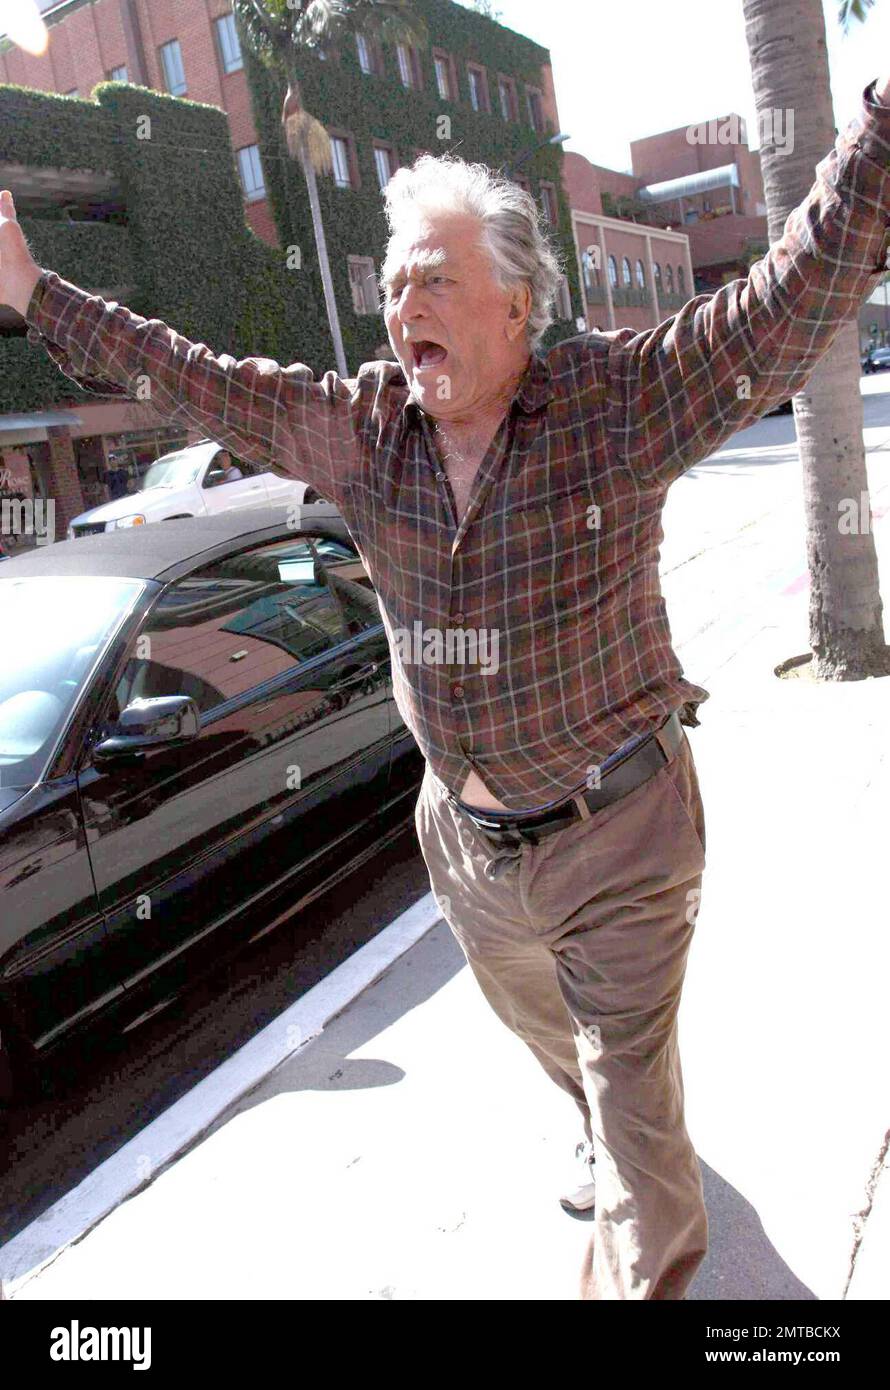 Peter Falk, best known for playing the title role on Columbo in the  1970s, was seen in Beverly Hills today and a passerby commented that Falk  seemed lost and disoriented. A good